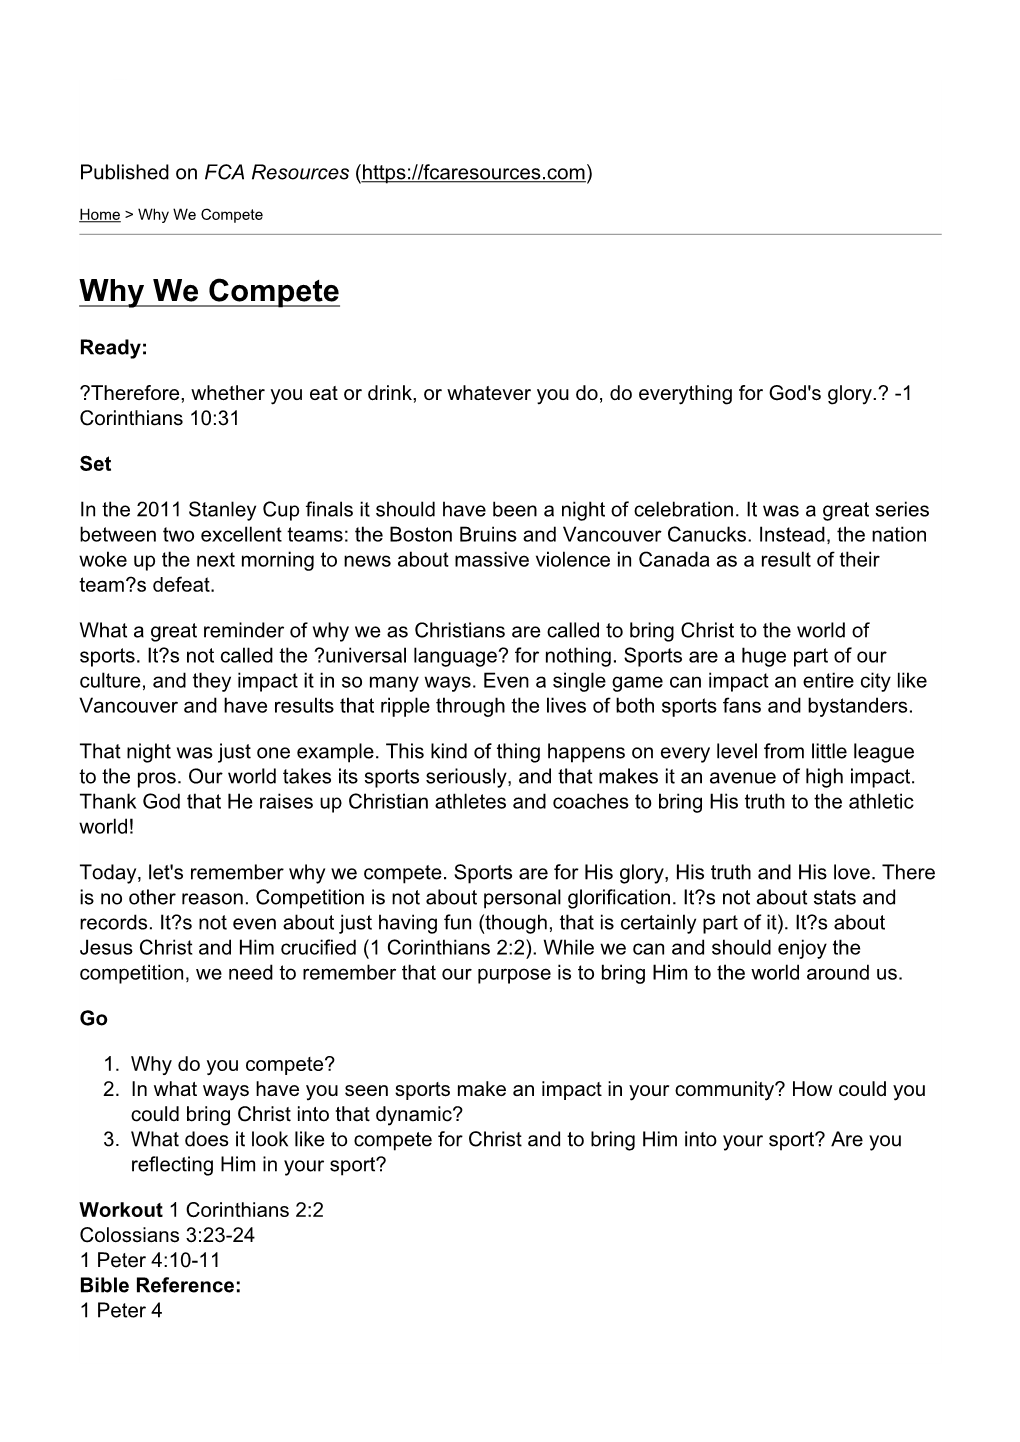 Why We Compete